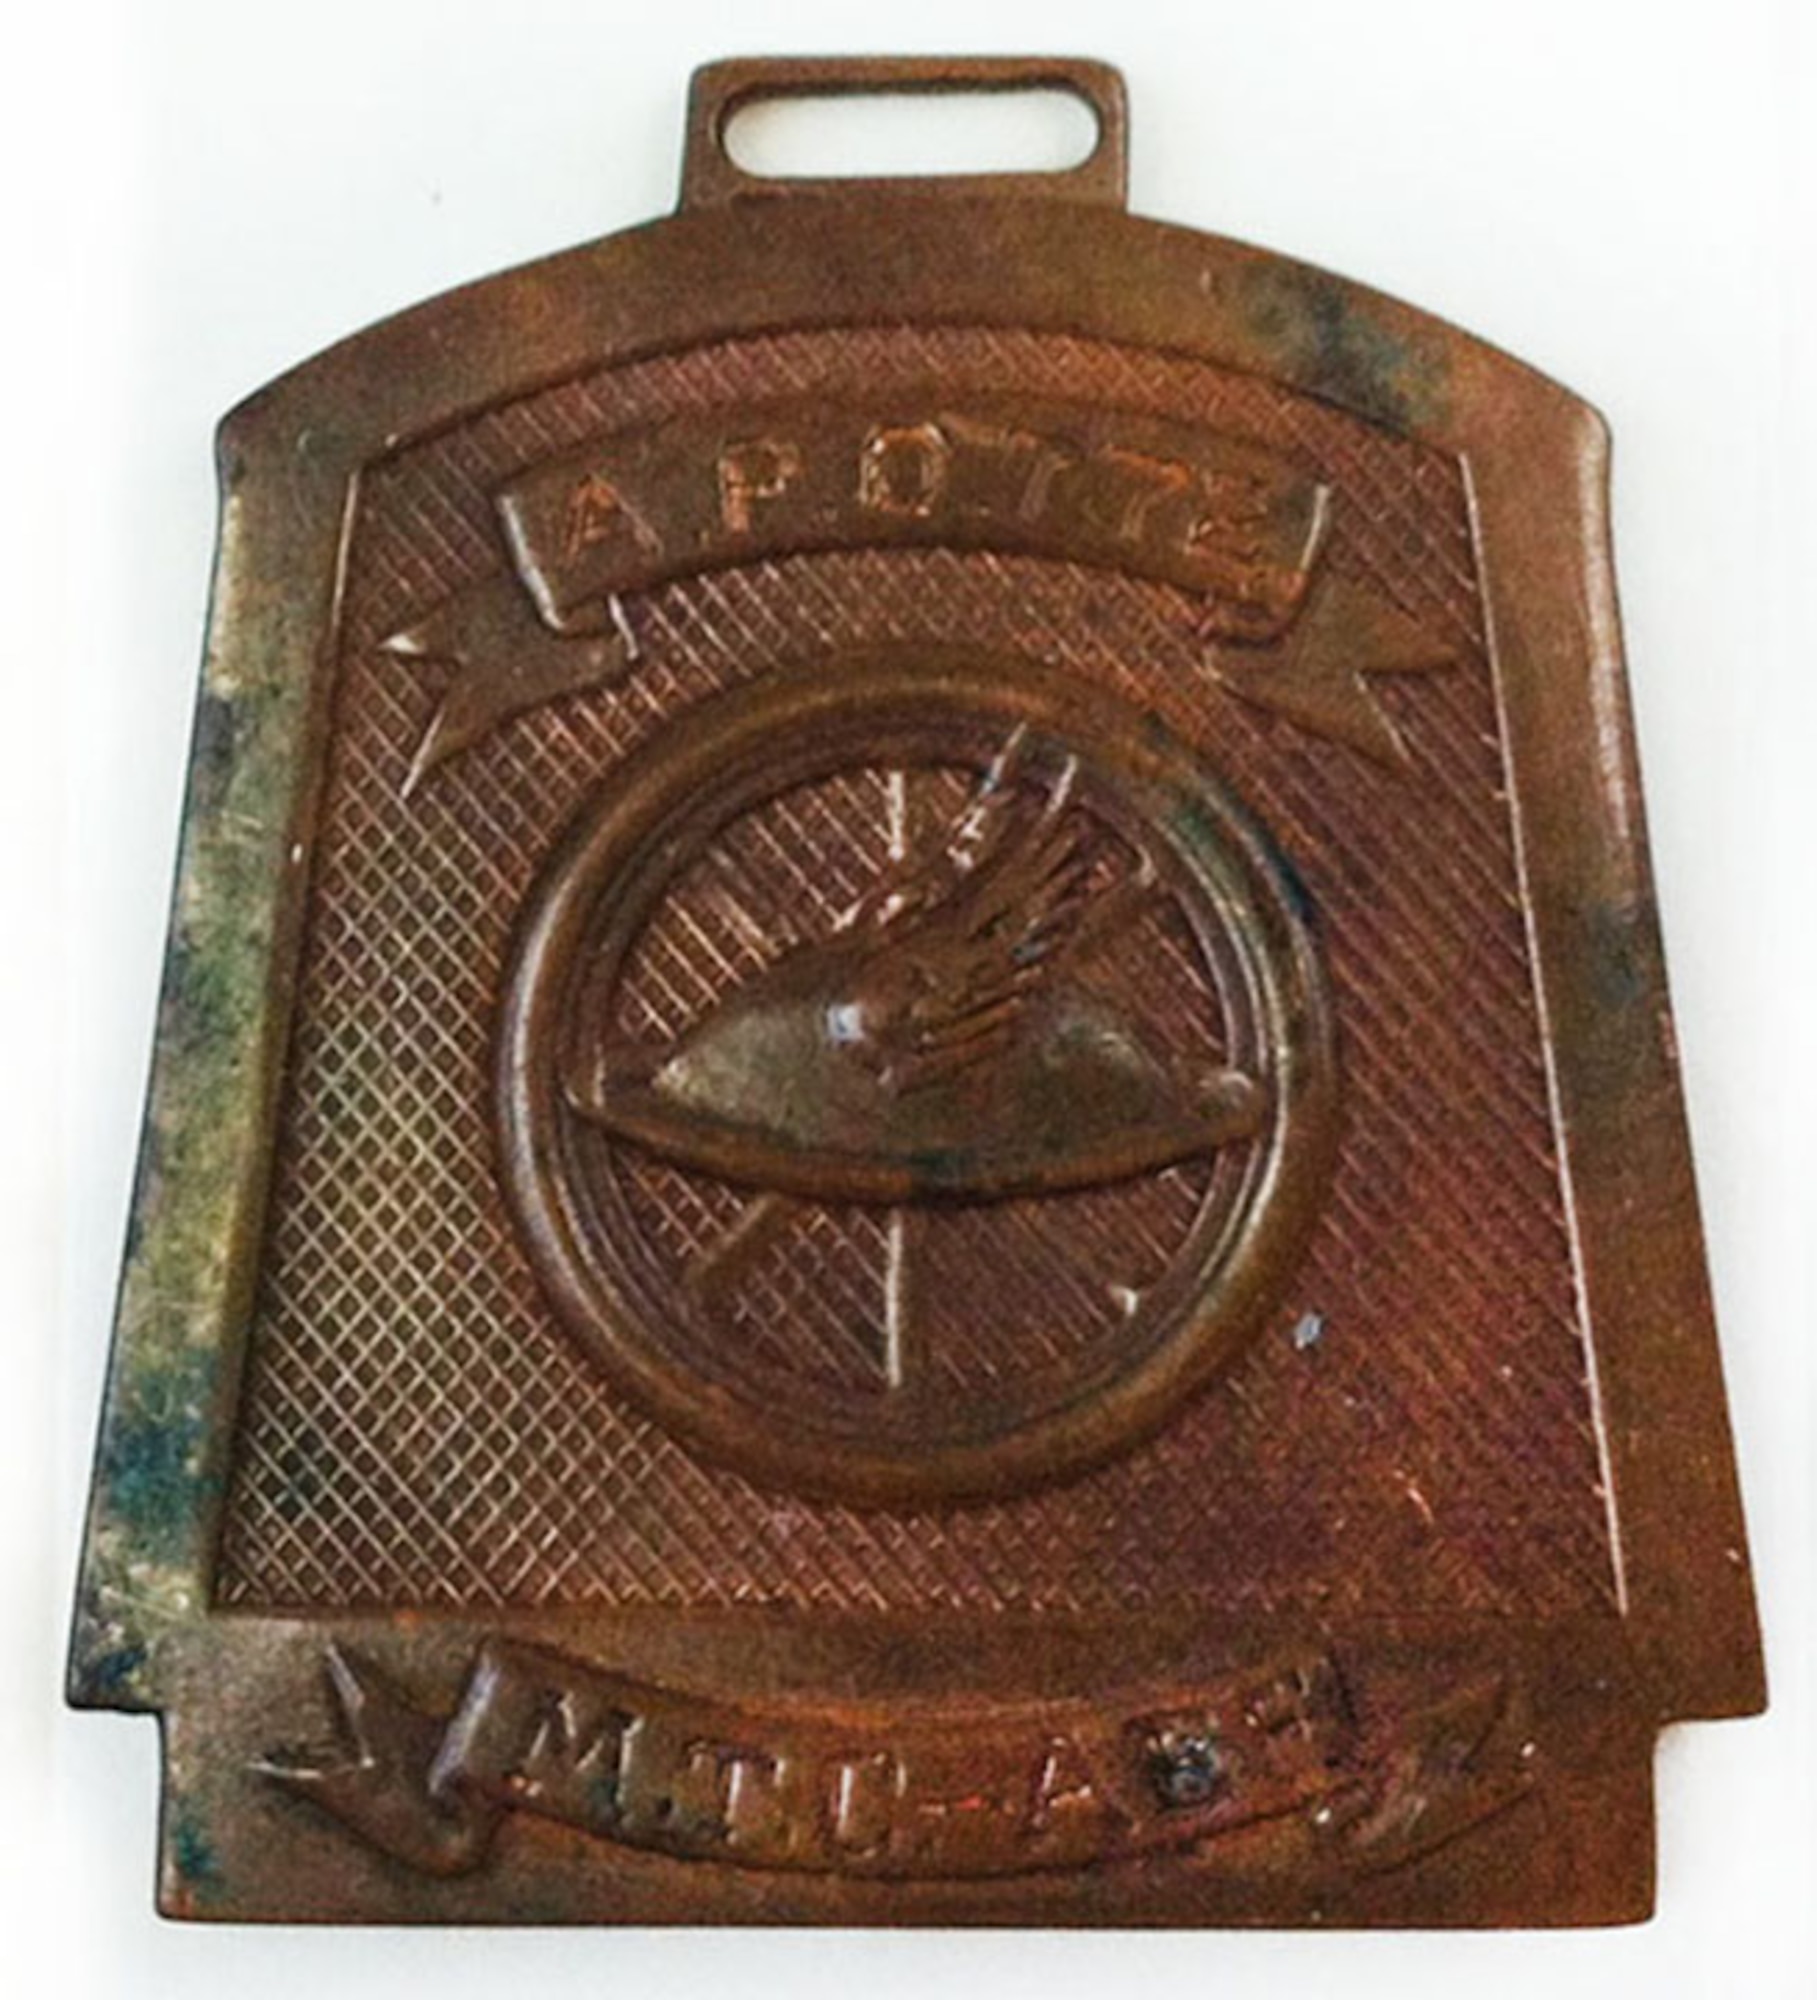 This World War I medallion bears the American Expeditionary Force’s Motor Transport Corps’ emblem of a feather stuck in an infantry helmet, which is in front of a wheel. It is engraved: A.P.O. 772 M.T.C. – AEF. (U.S. Air Force photo)